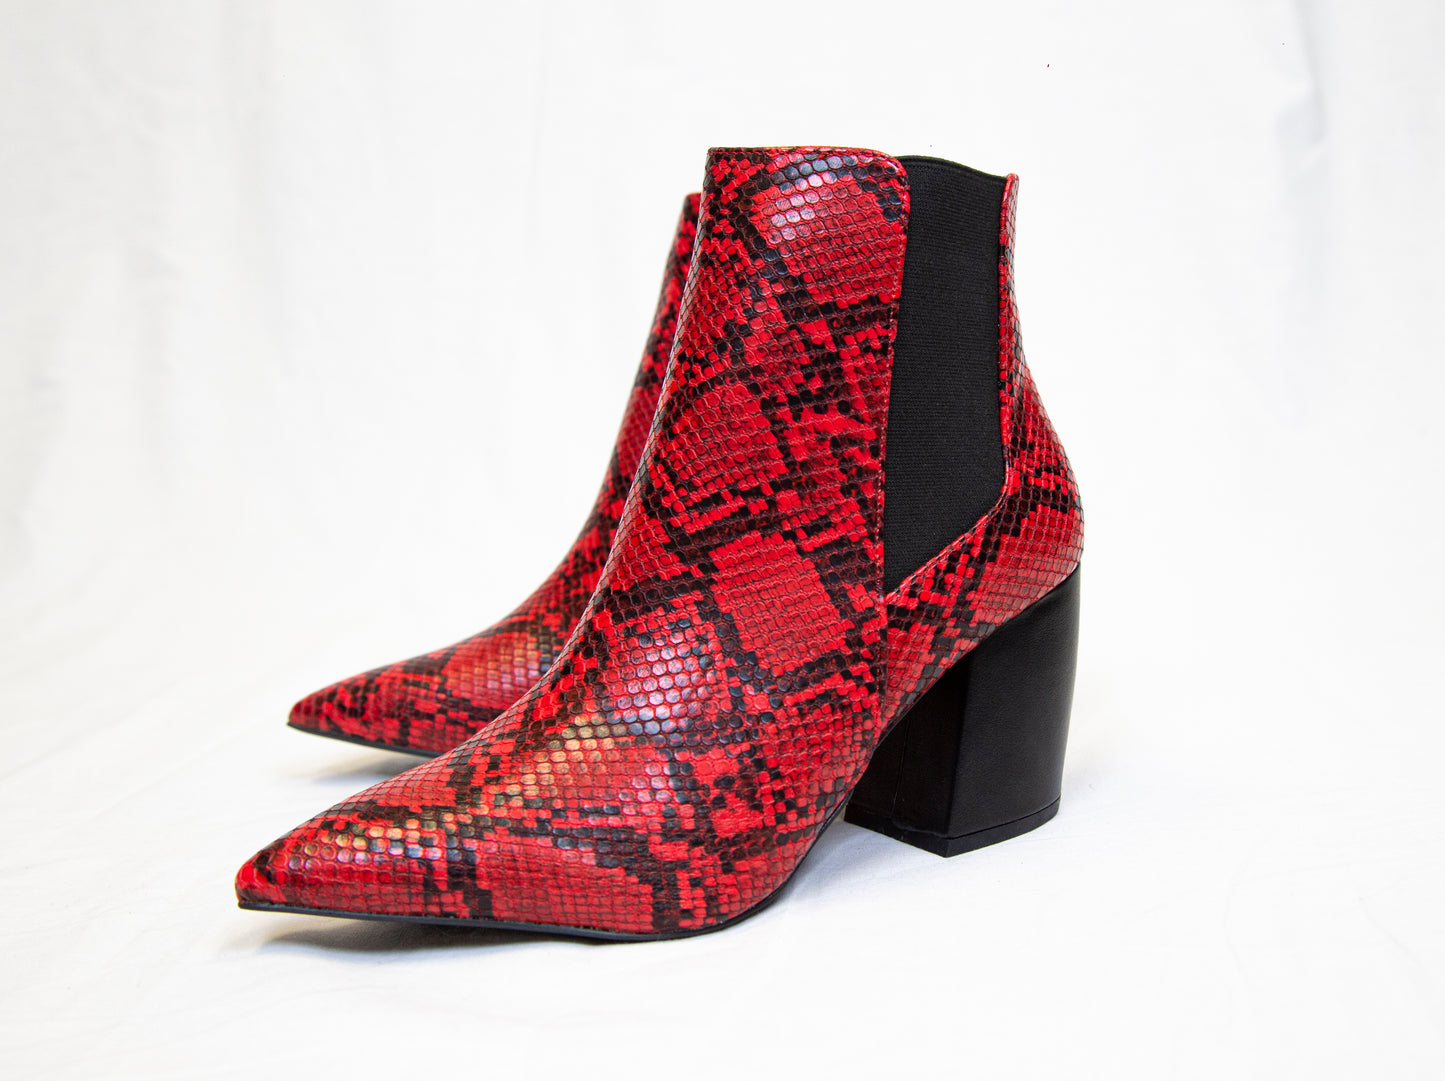 BAT OUT OF HELL RED SNAKESKIN BOOTIES